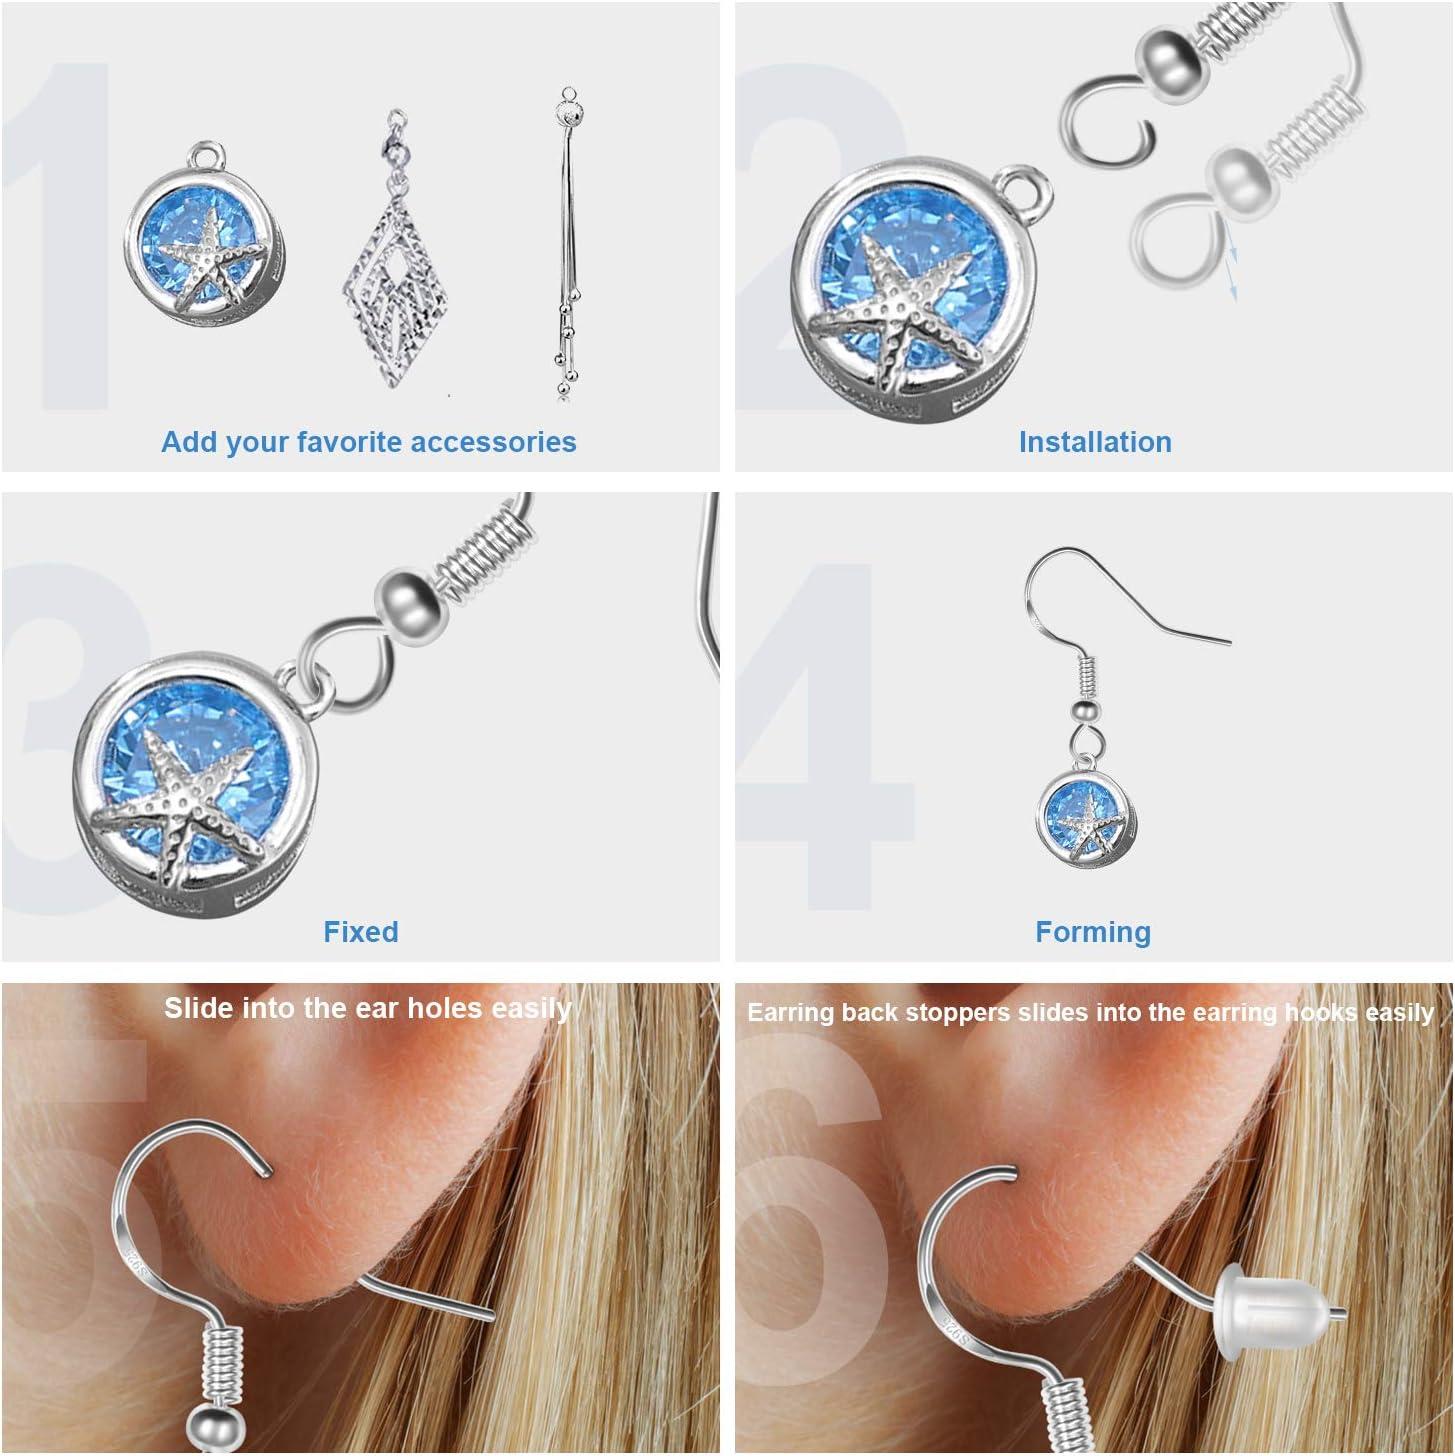 925 Sterling Silver Earring Hooks 120 PCS/60 Pairs, Ear Wires Fish Hooks,  Hypo-allergenic Jewelry Findings Parts with 120 PCS Clear Silicone Earring  Backs Stoppers for DIY Jewelry Making Silver 120